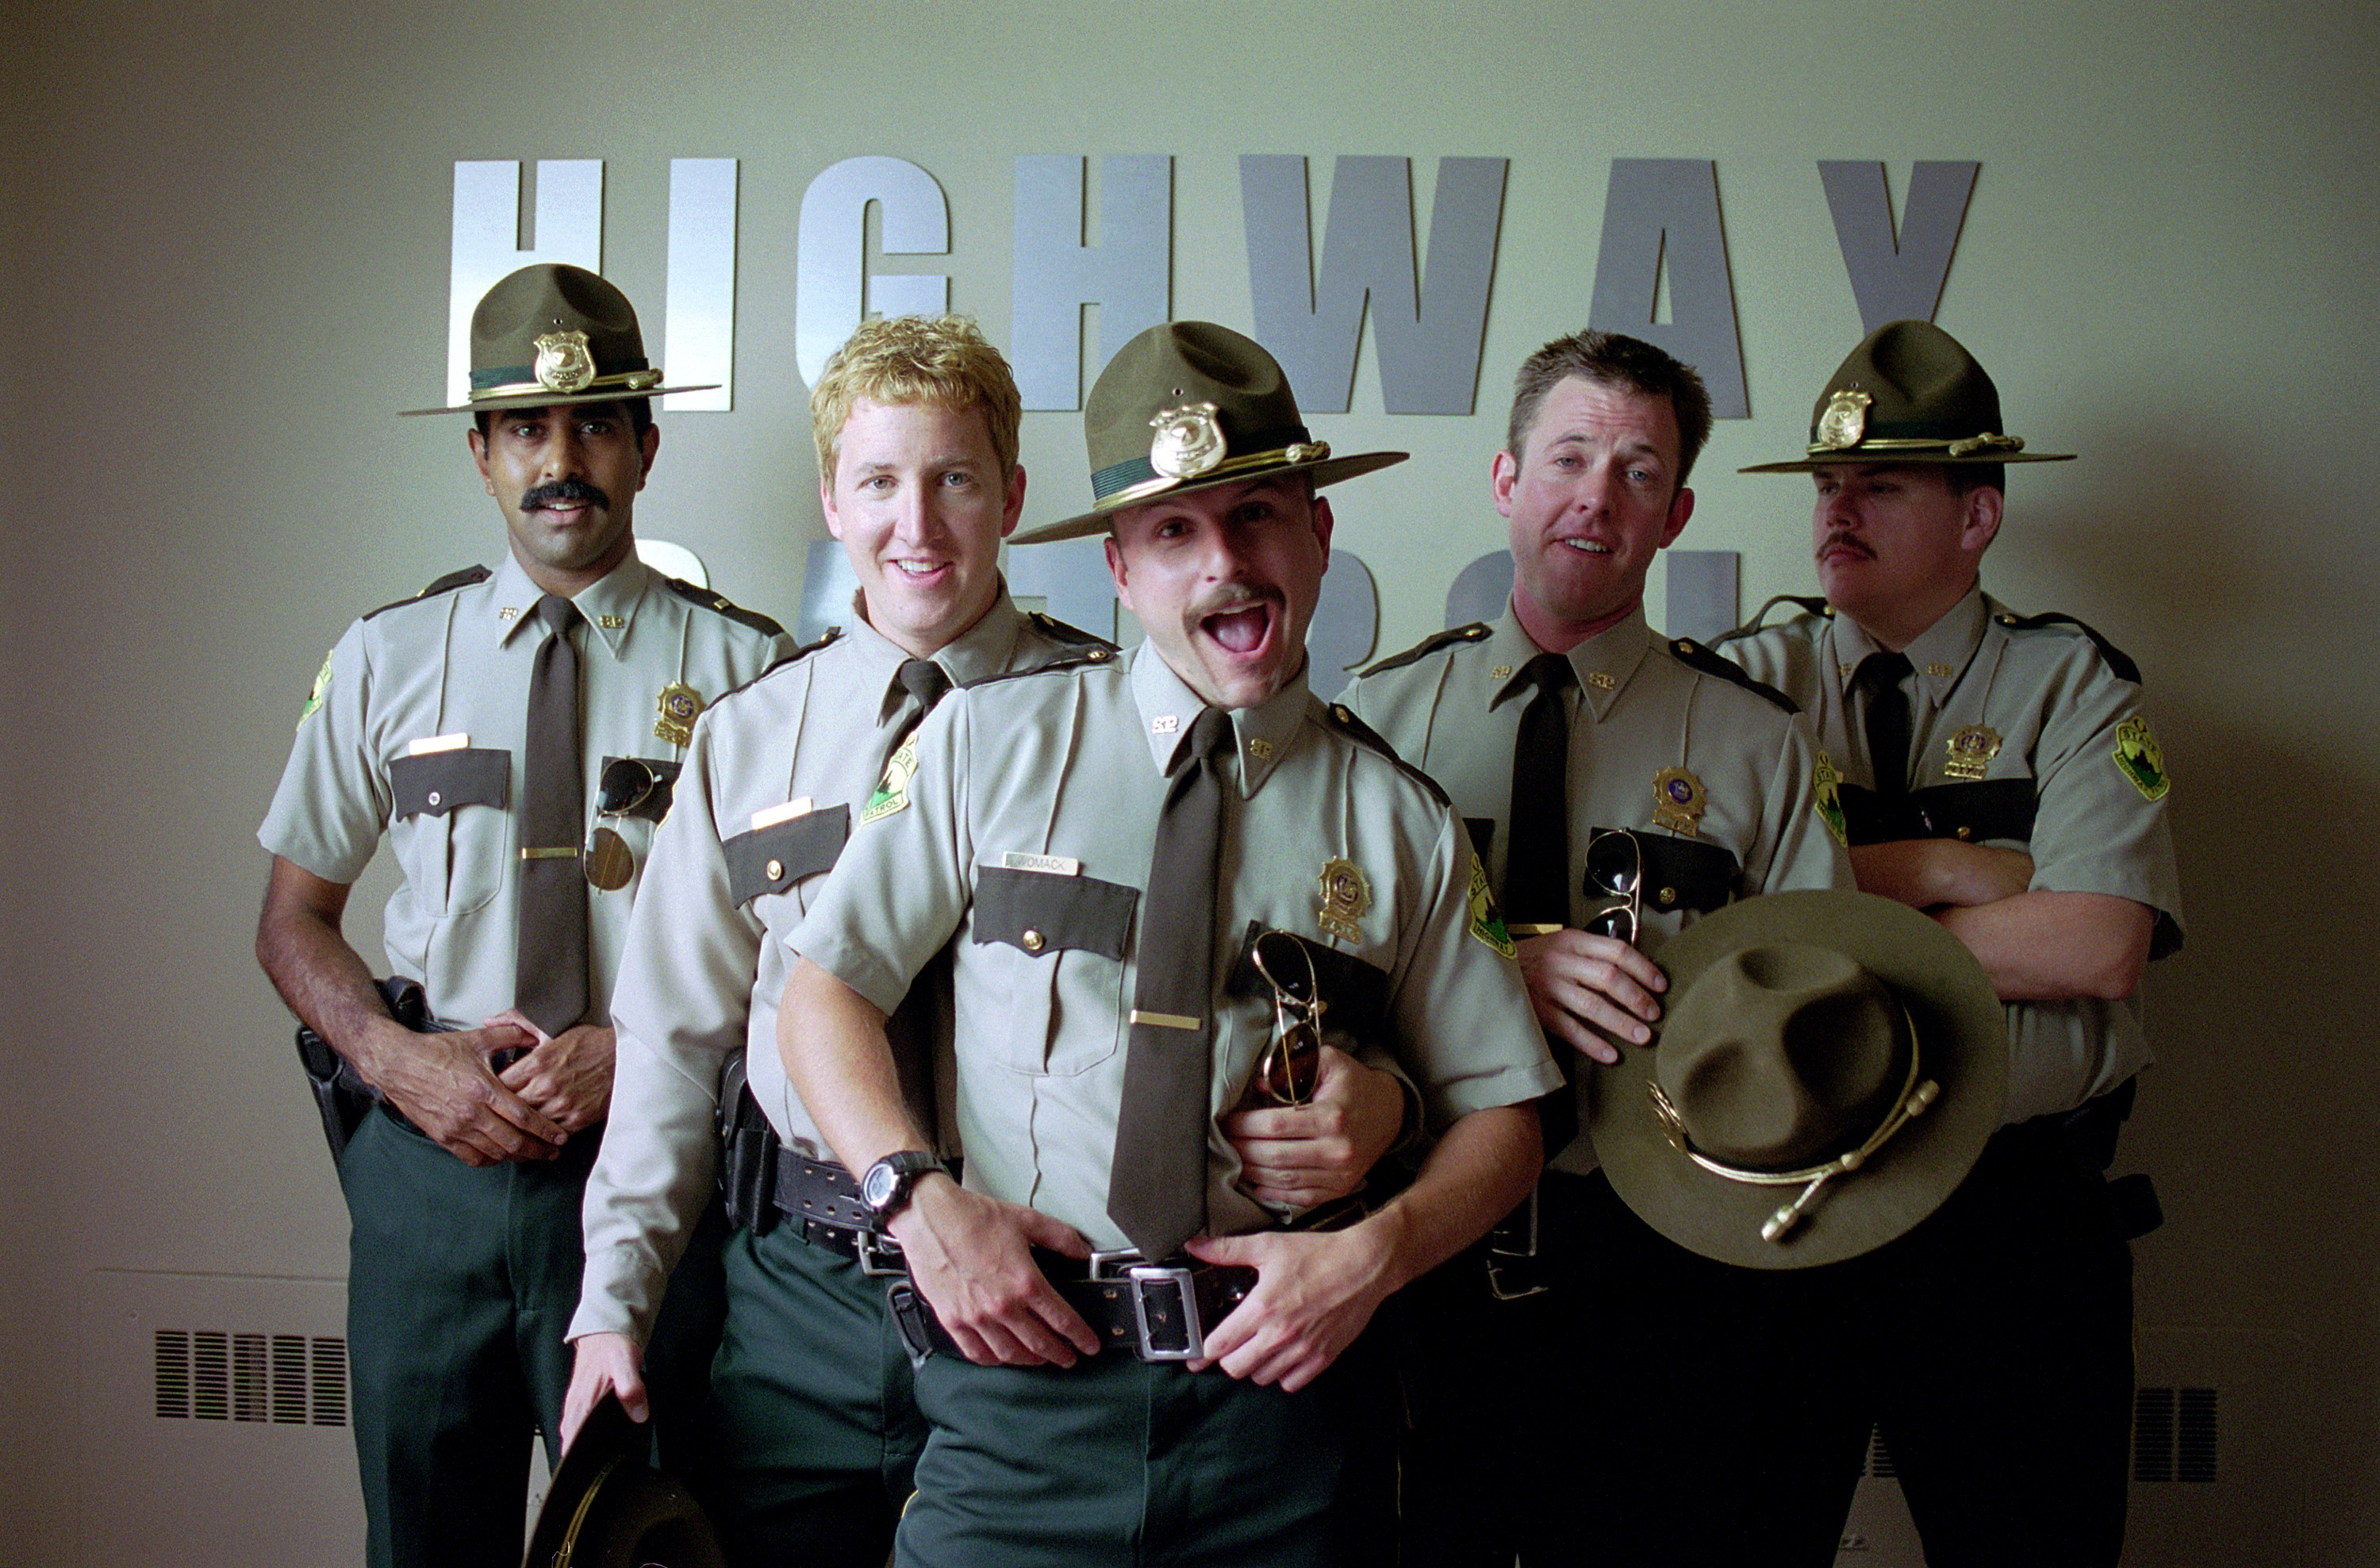 Movie News: Super Troopers sequel is coming